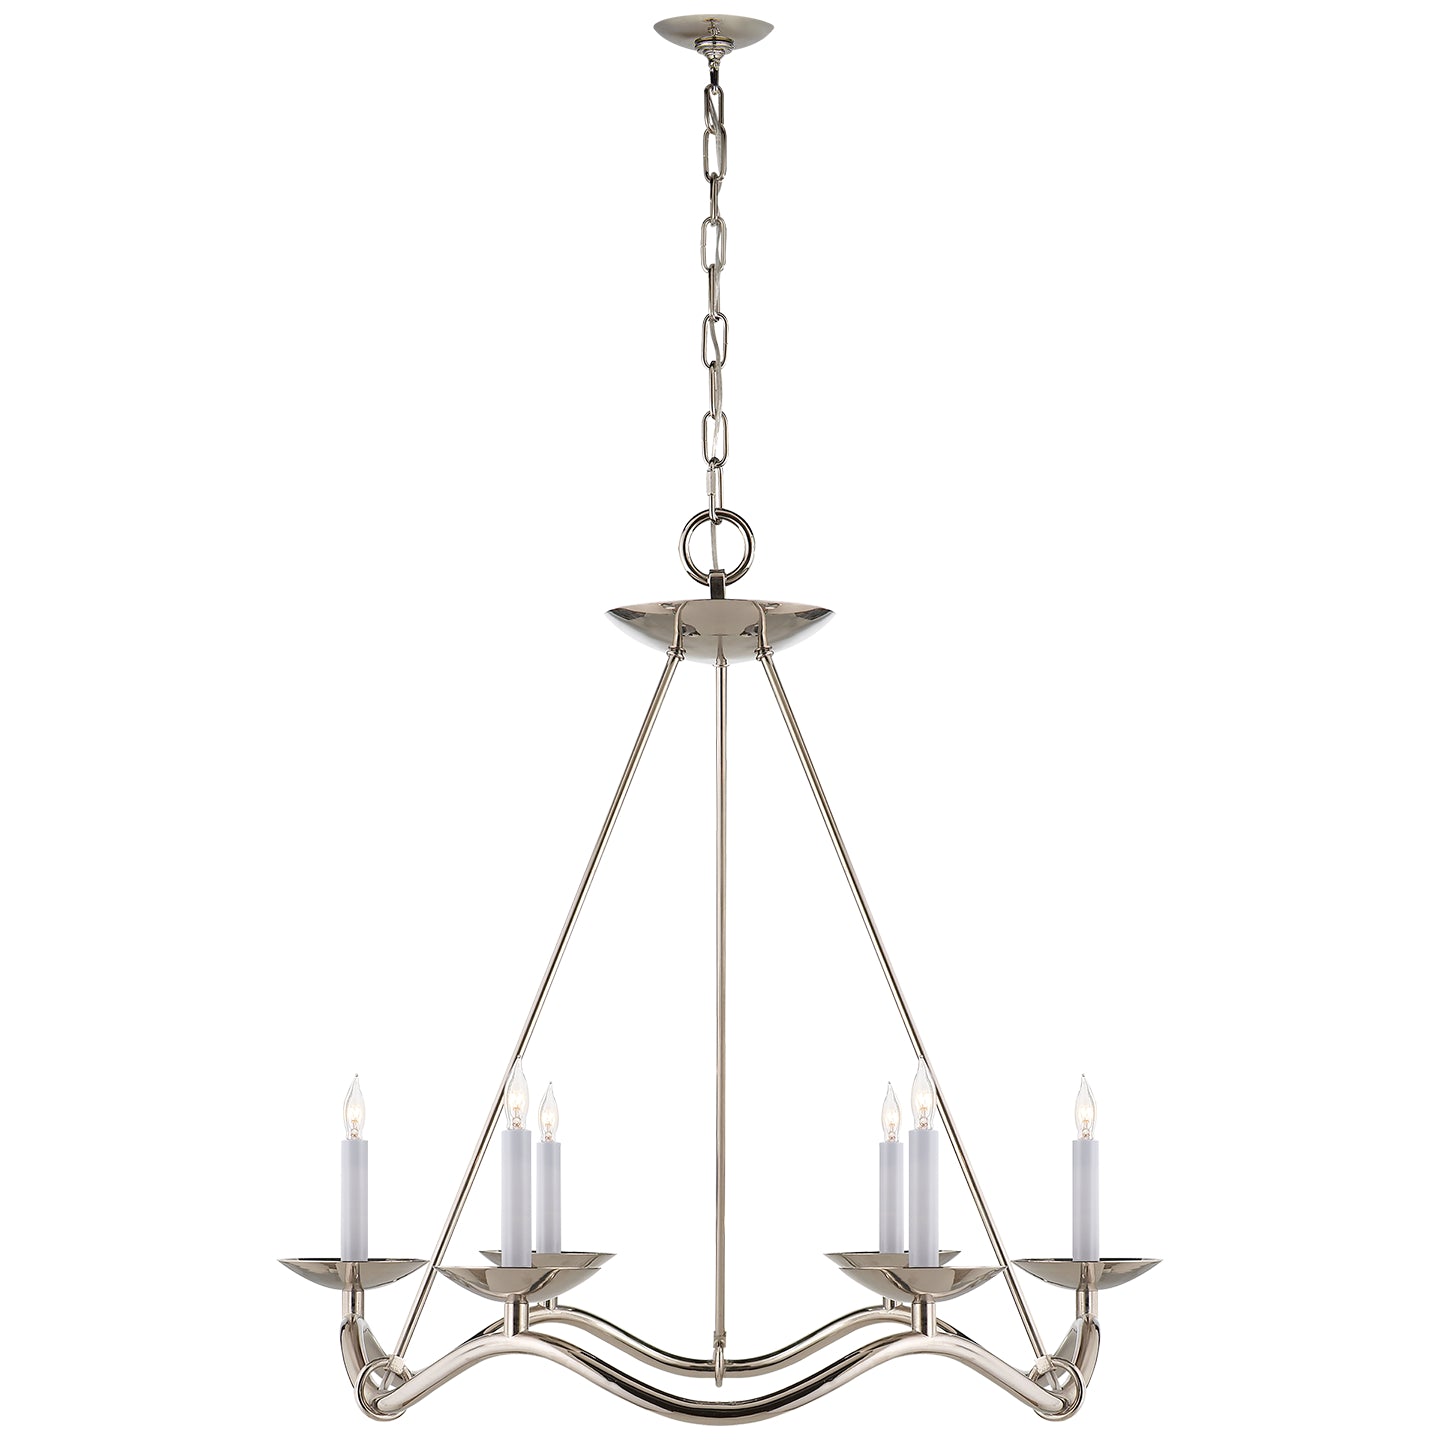 Load image into Gallery viewer, Visual Comfort Signature - S 5040PN - Six Light Chandelier - Choros - Polished Nickel
